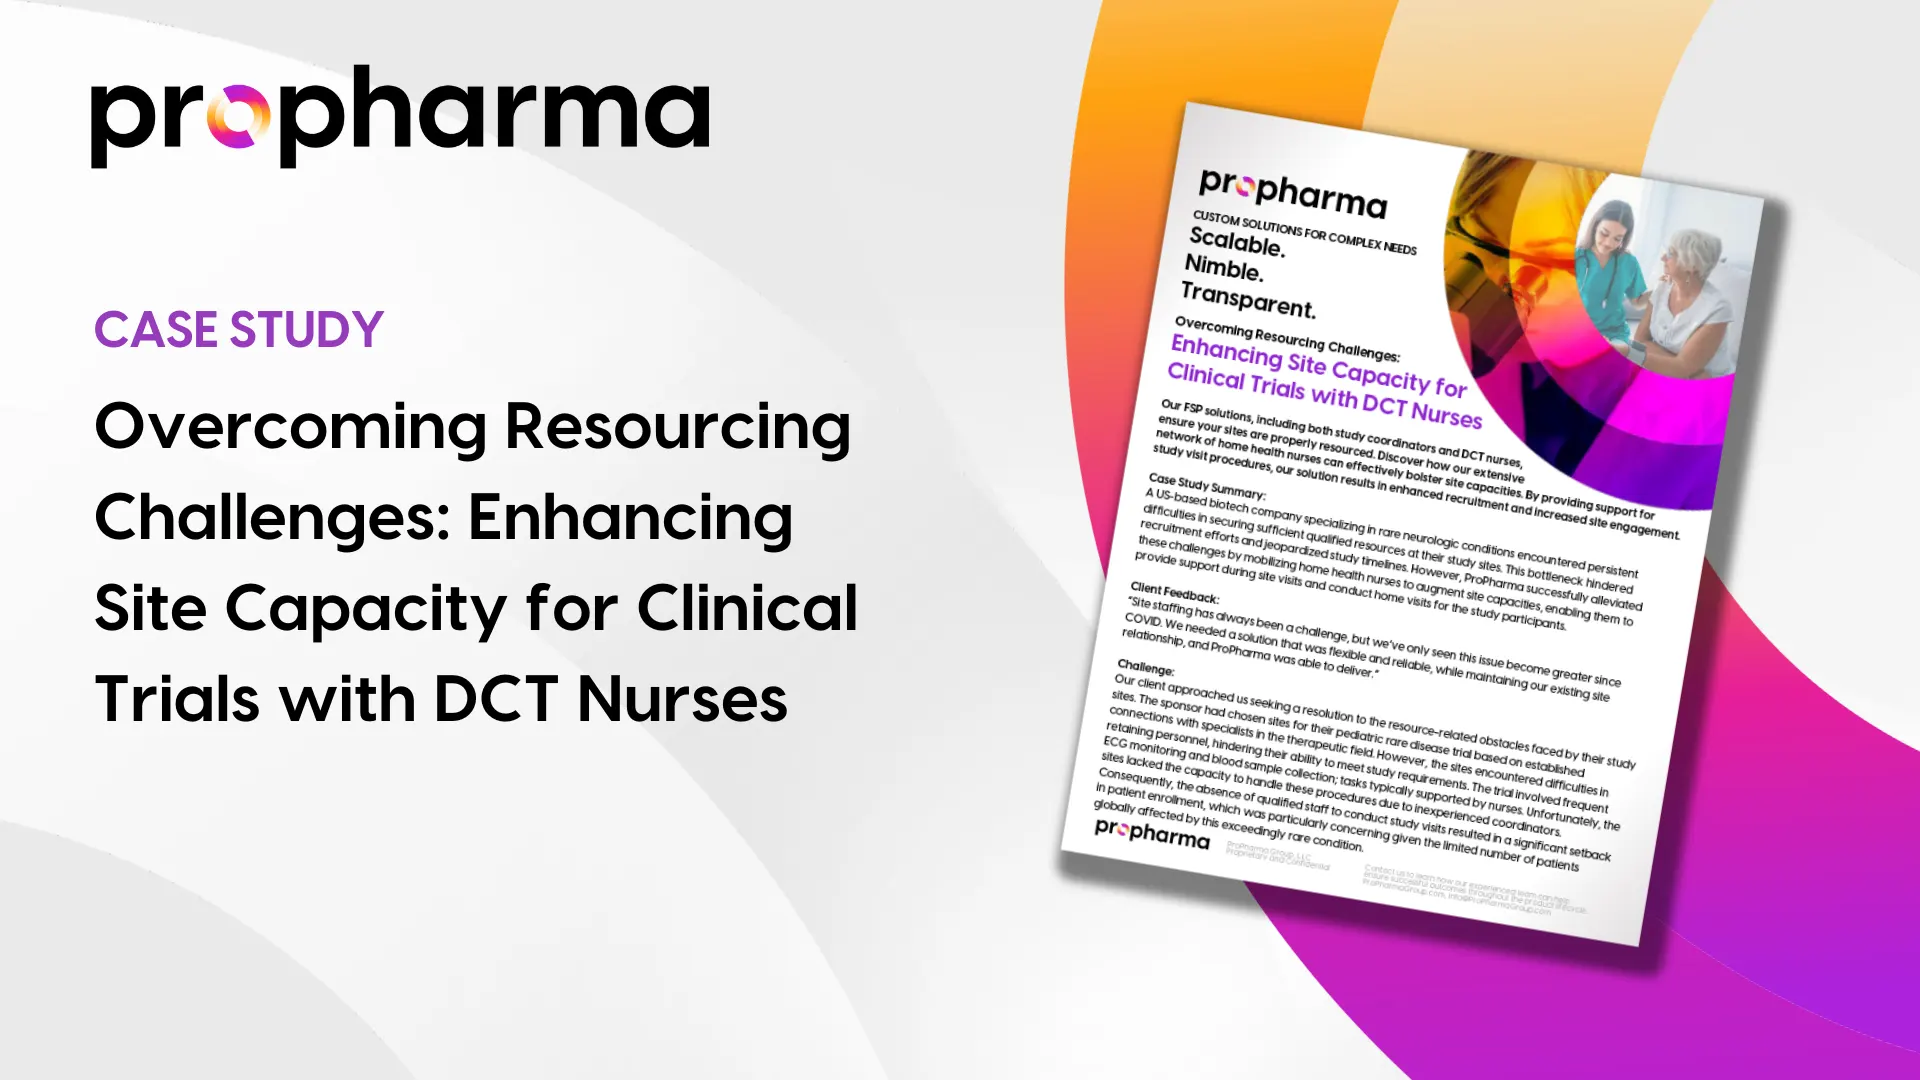 Enhancing Site Capacity for Clinical Trials with DCT Nurses